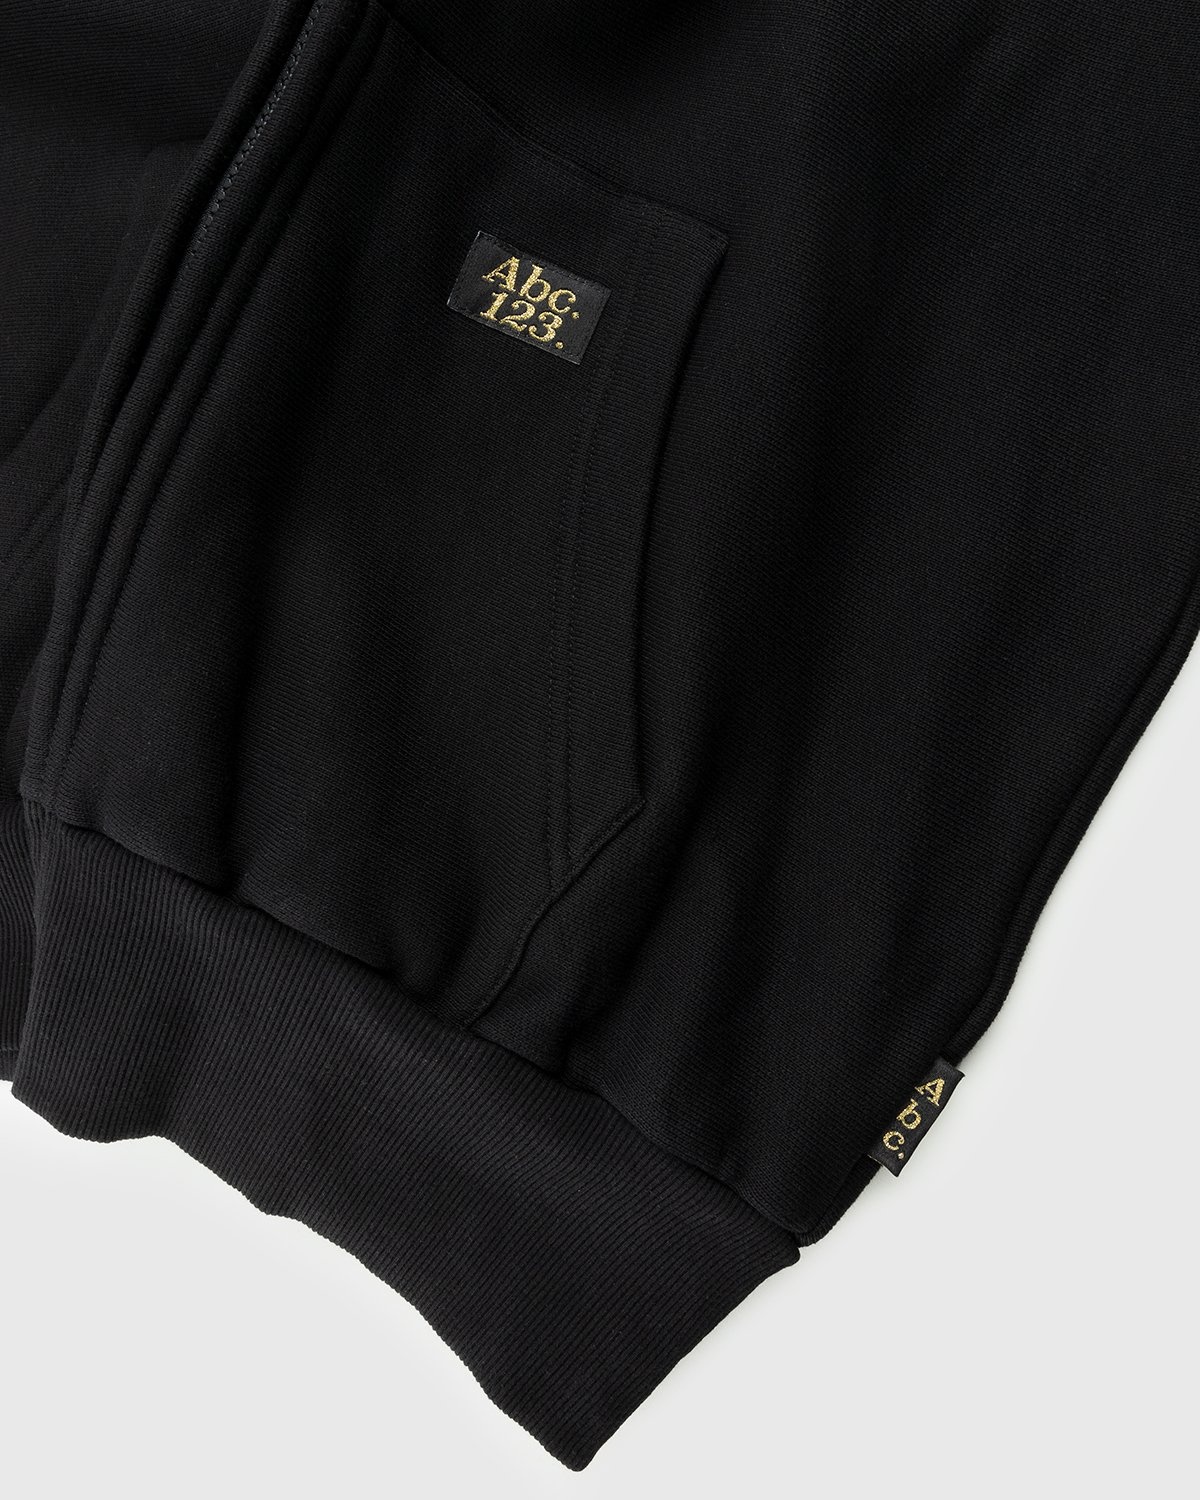 Abc. – Zip-Up French Terry Hoodie Anthracite - Sweats - Black - Image 5